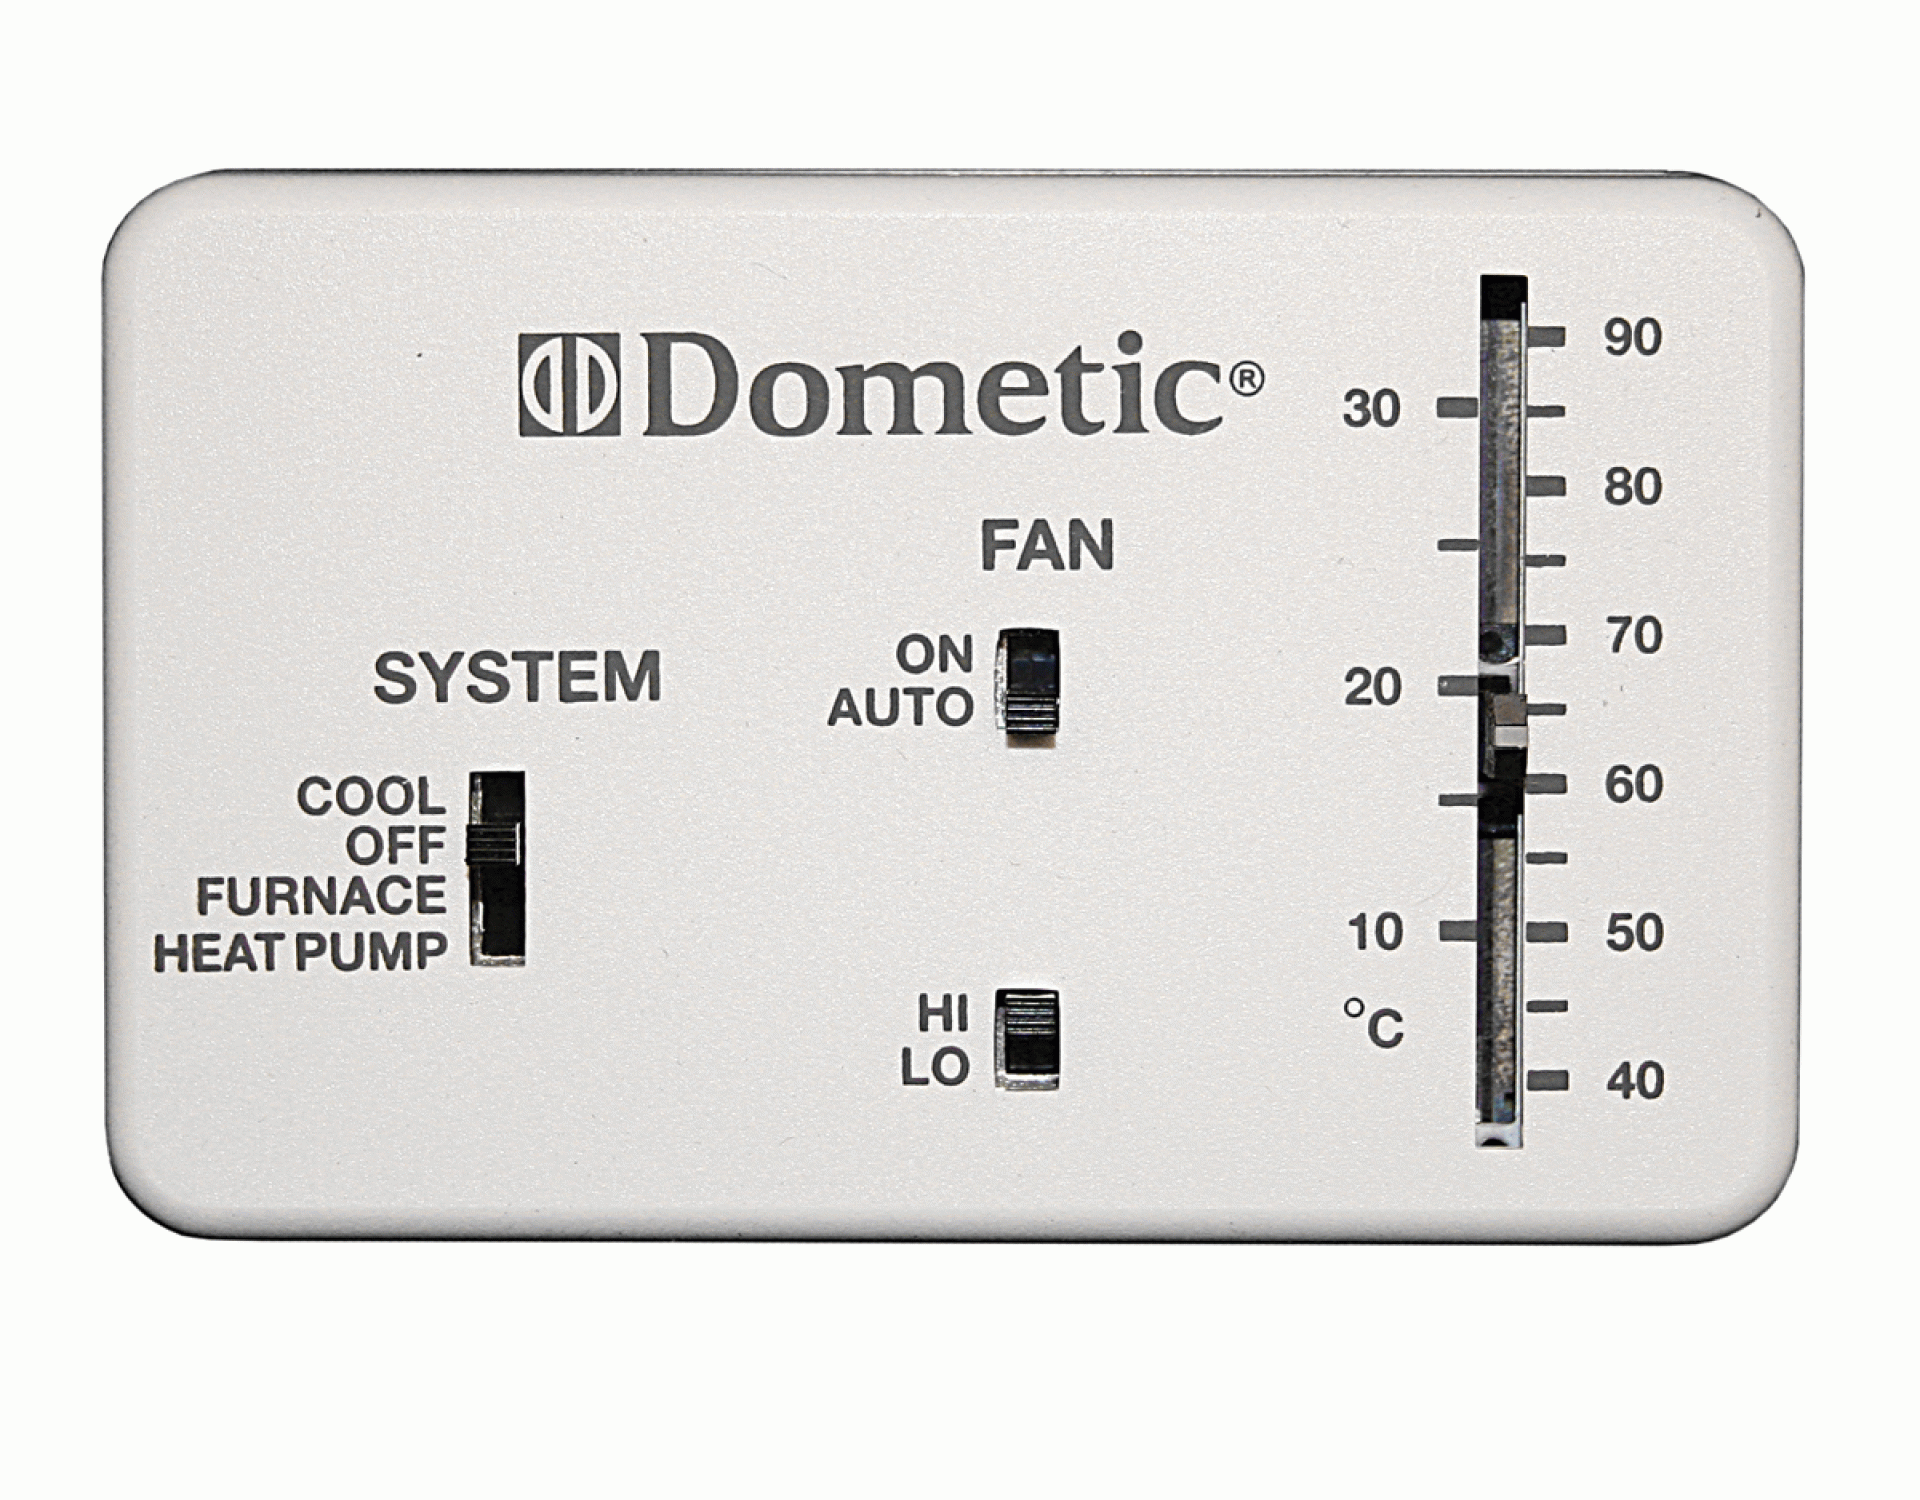 DOMETIC | 3106995.040 | ANALOG THERMOSTAT COOL FURNACE HEAT PUMP